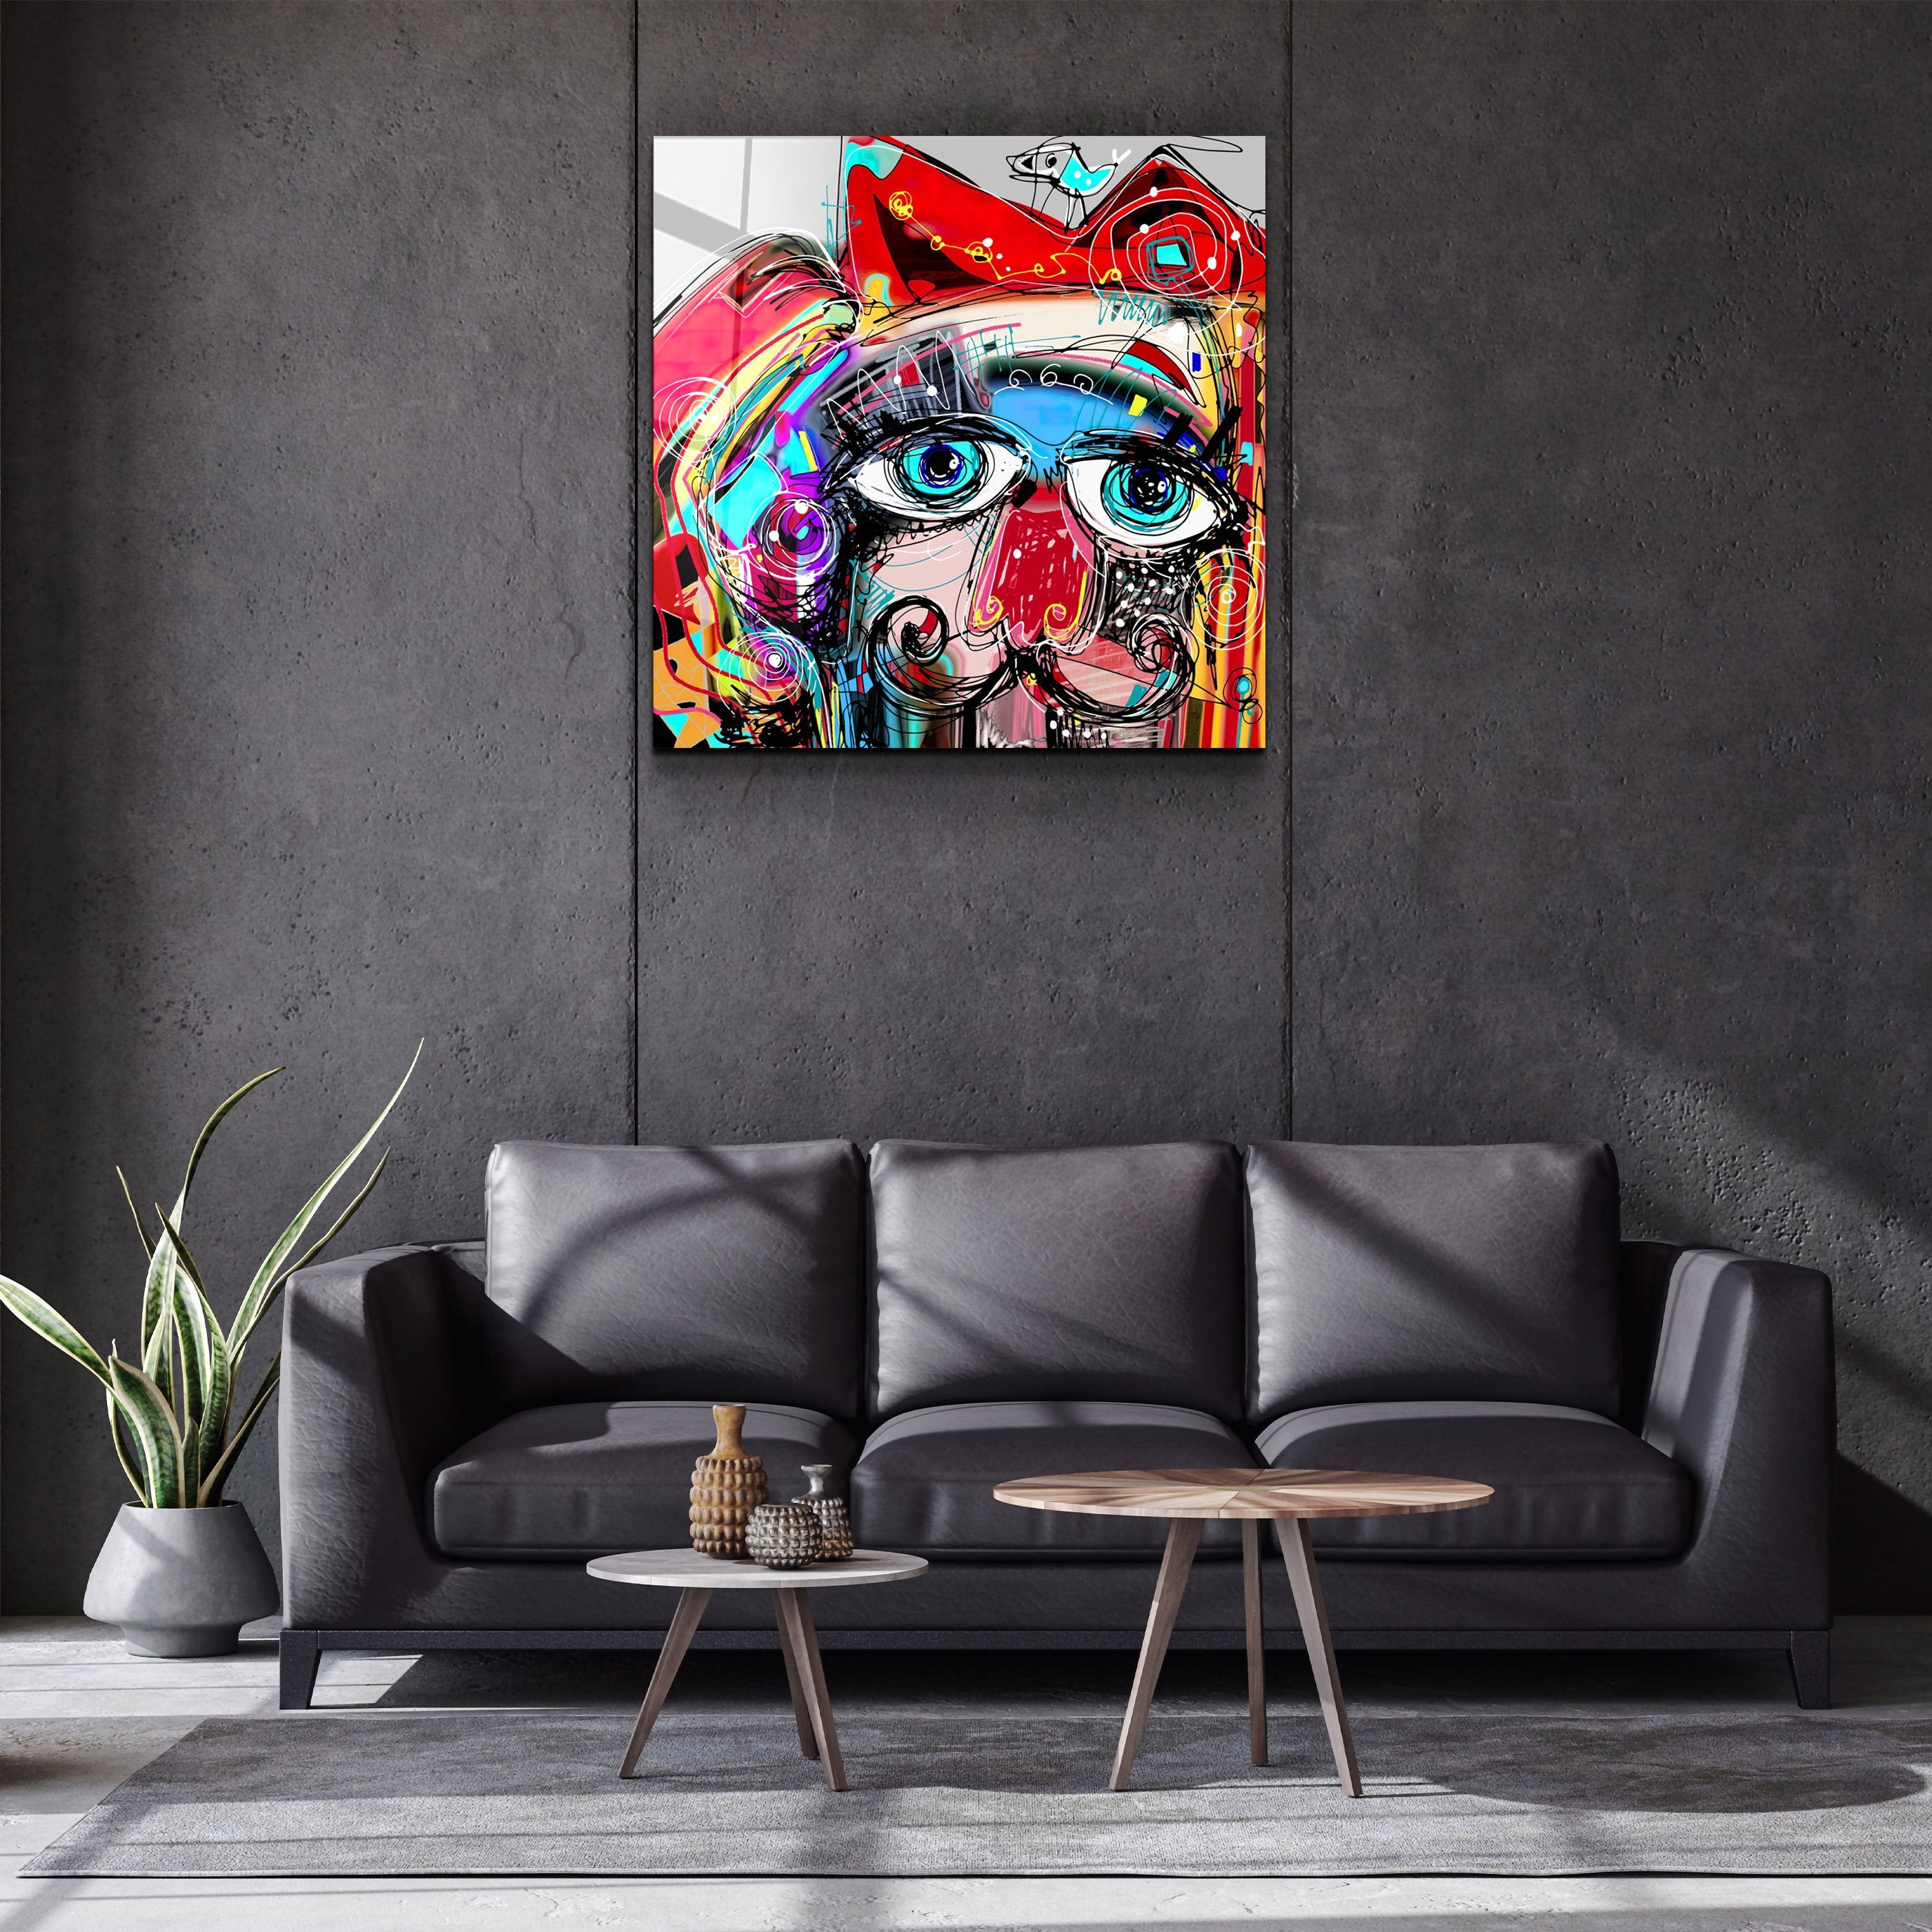 ・"Abstract Colorful Portrait"・Glass Wall Art